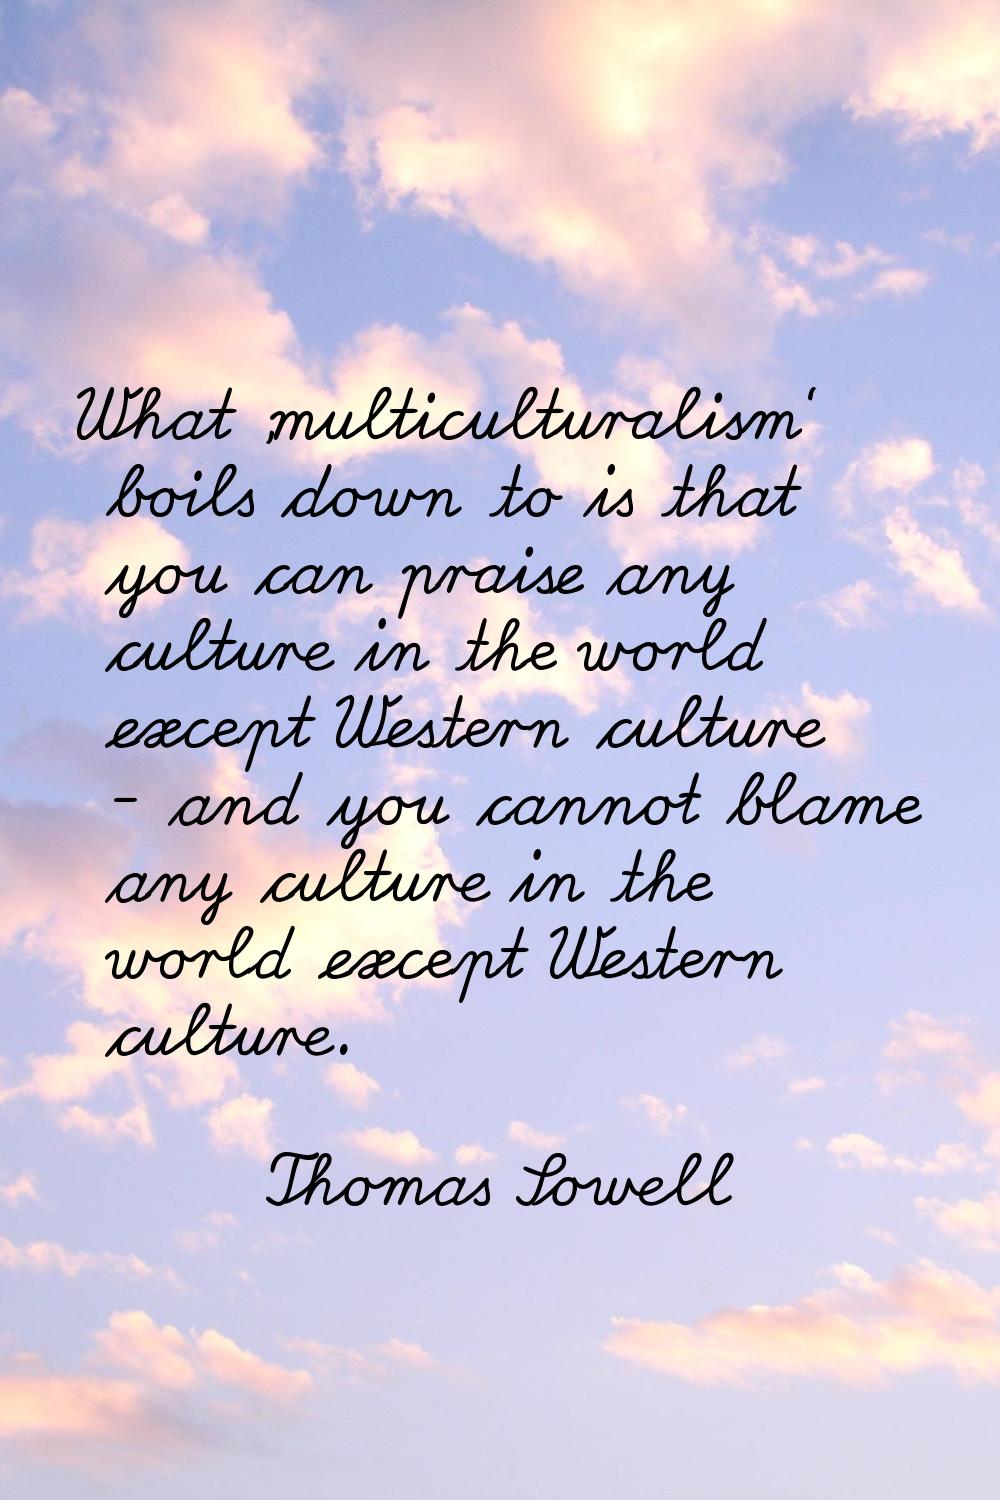 What 'multiculturalism' boils down to is that you can praise any culture in the world except Wester